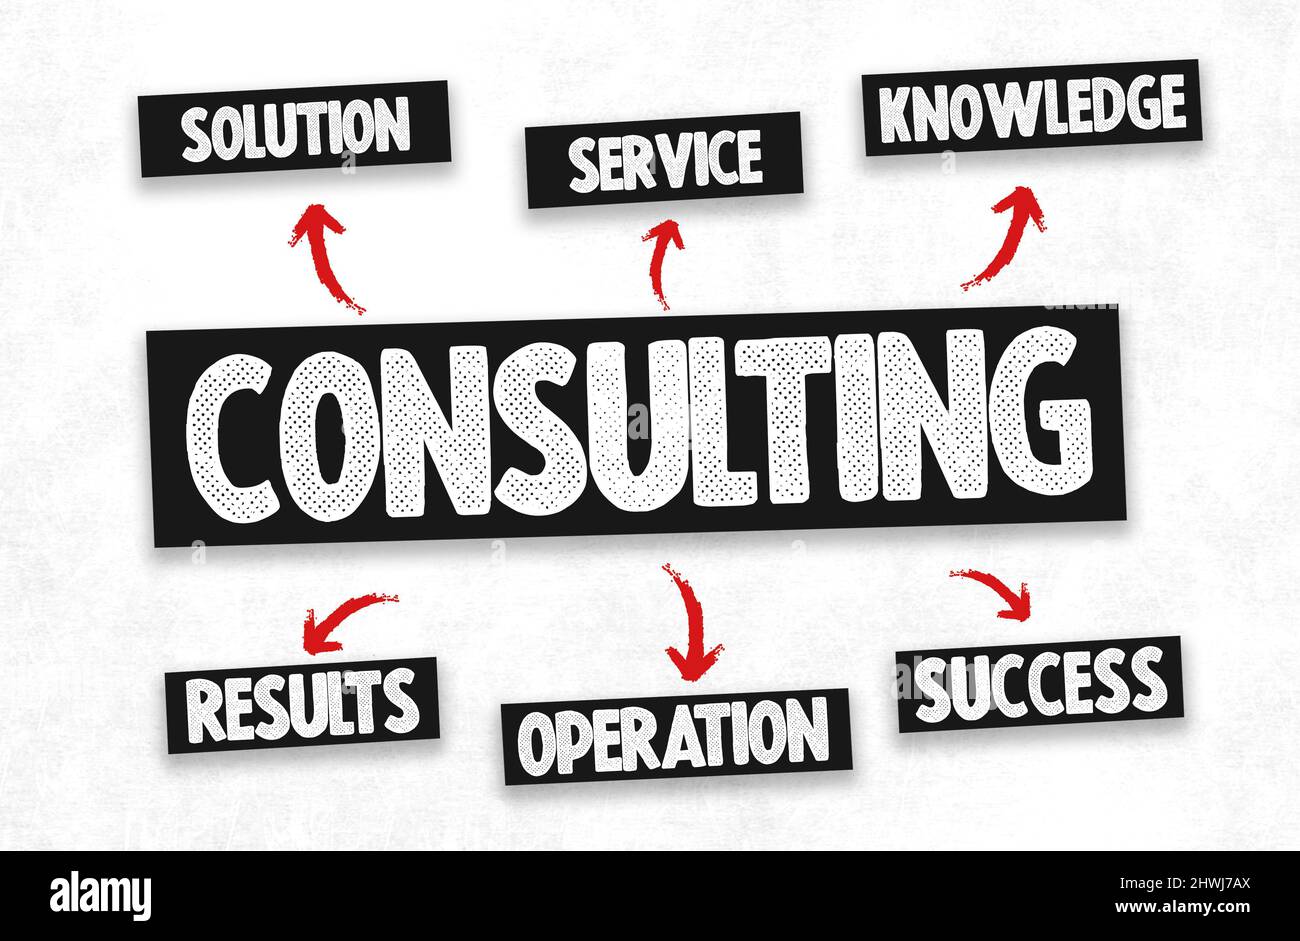 Consulting - written concept illustration Stock Photo